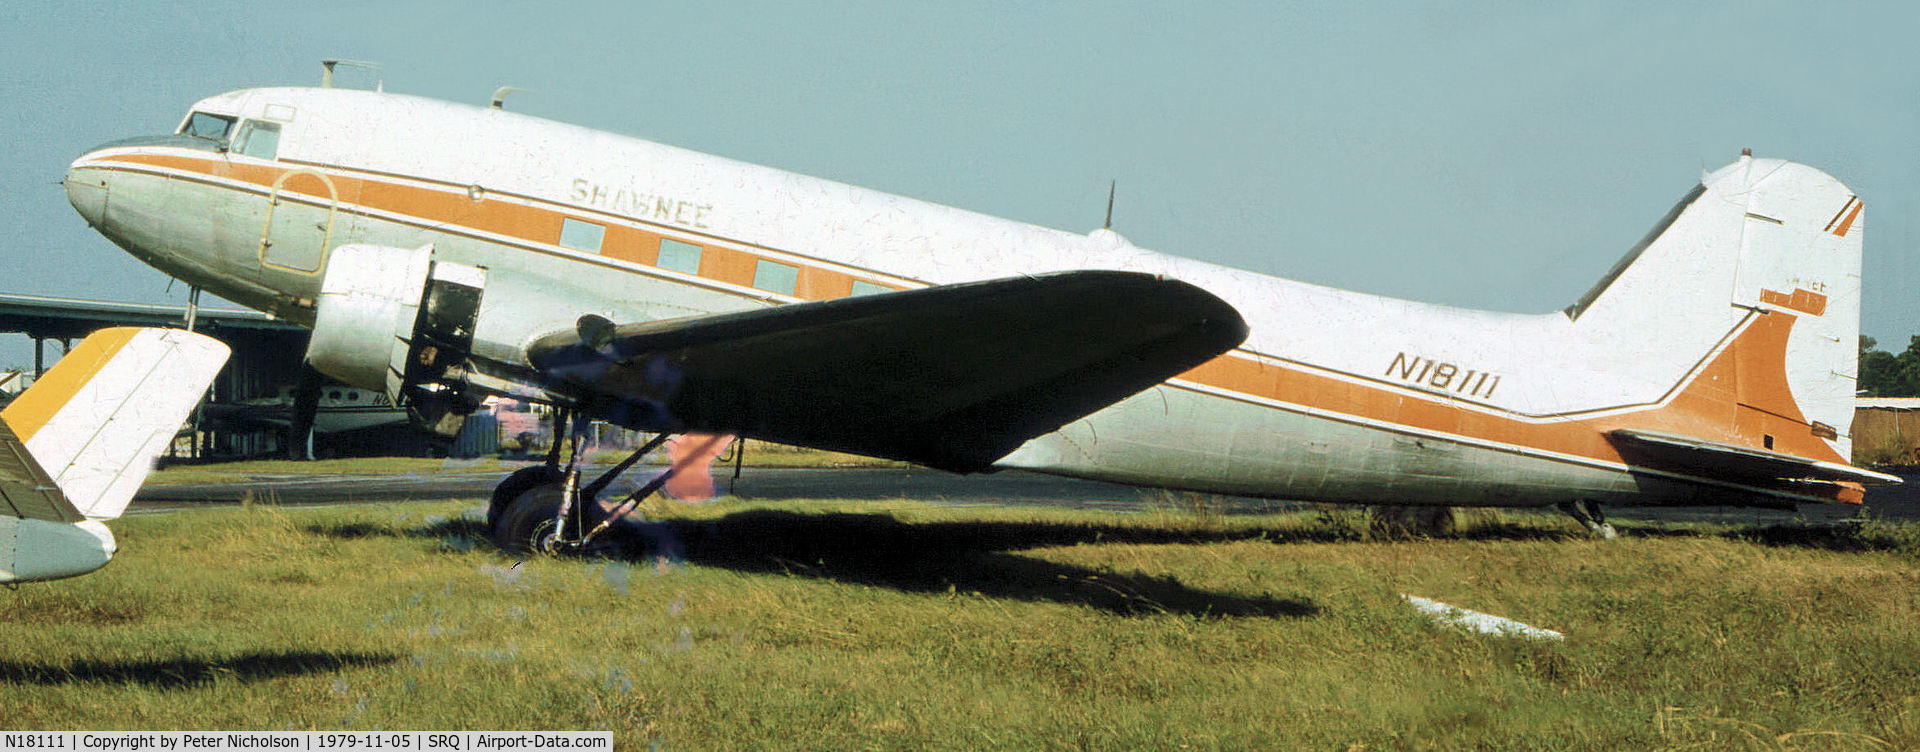 N18111, 1935 Douglas DC-3A-197 C/N 1983, This Shawnee Airlines C-47A was seen at Sarasota in November 1979.